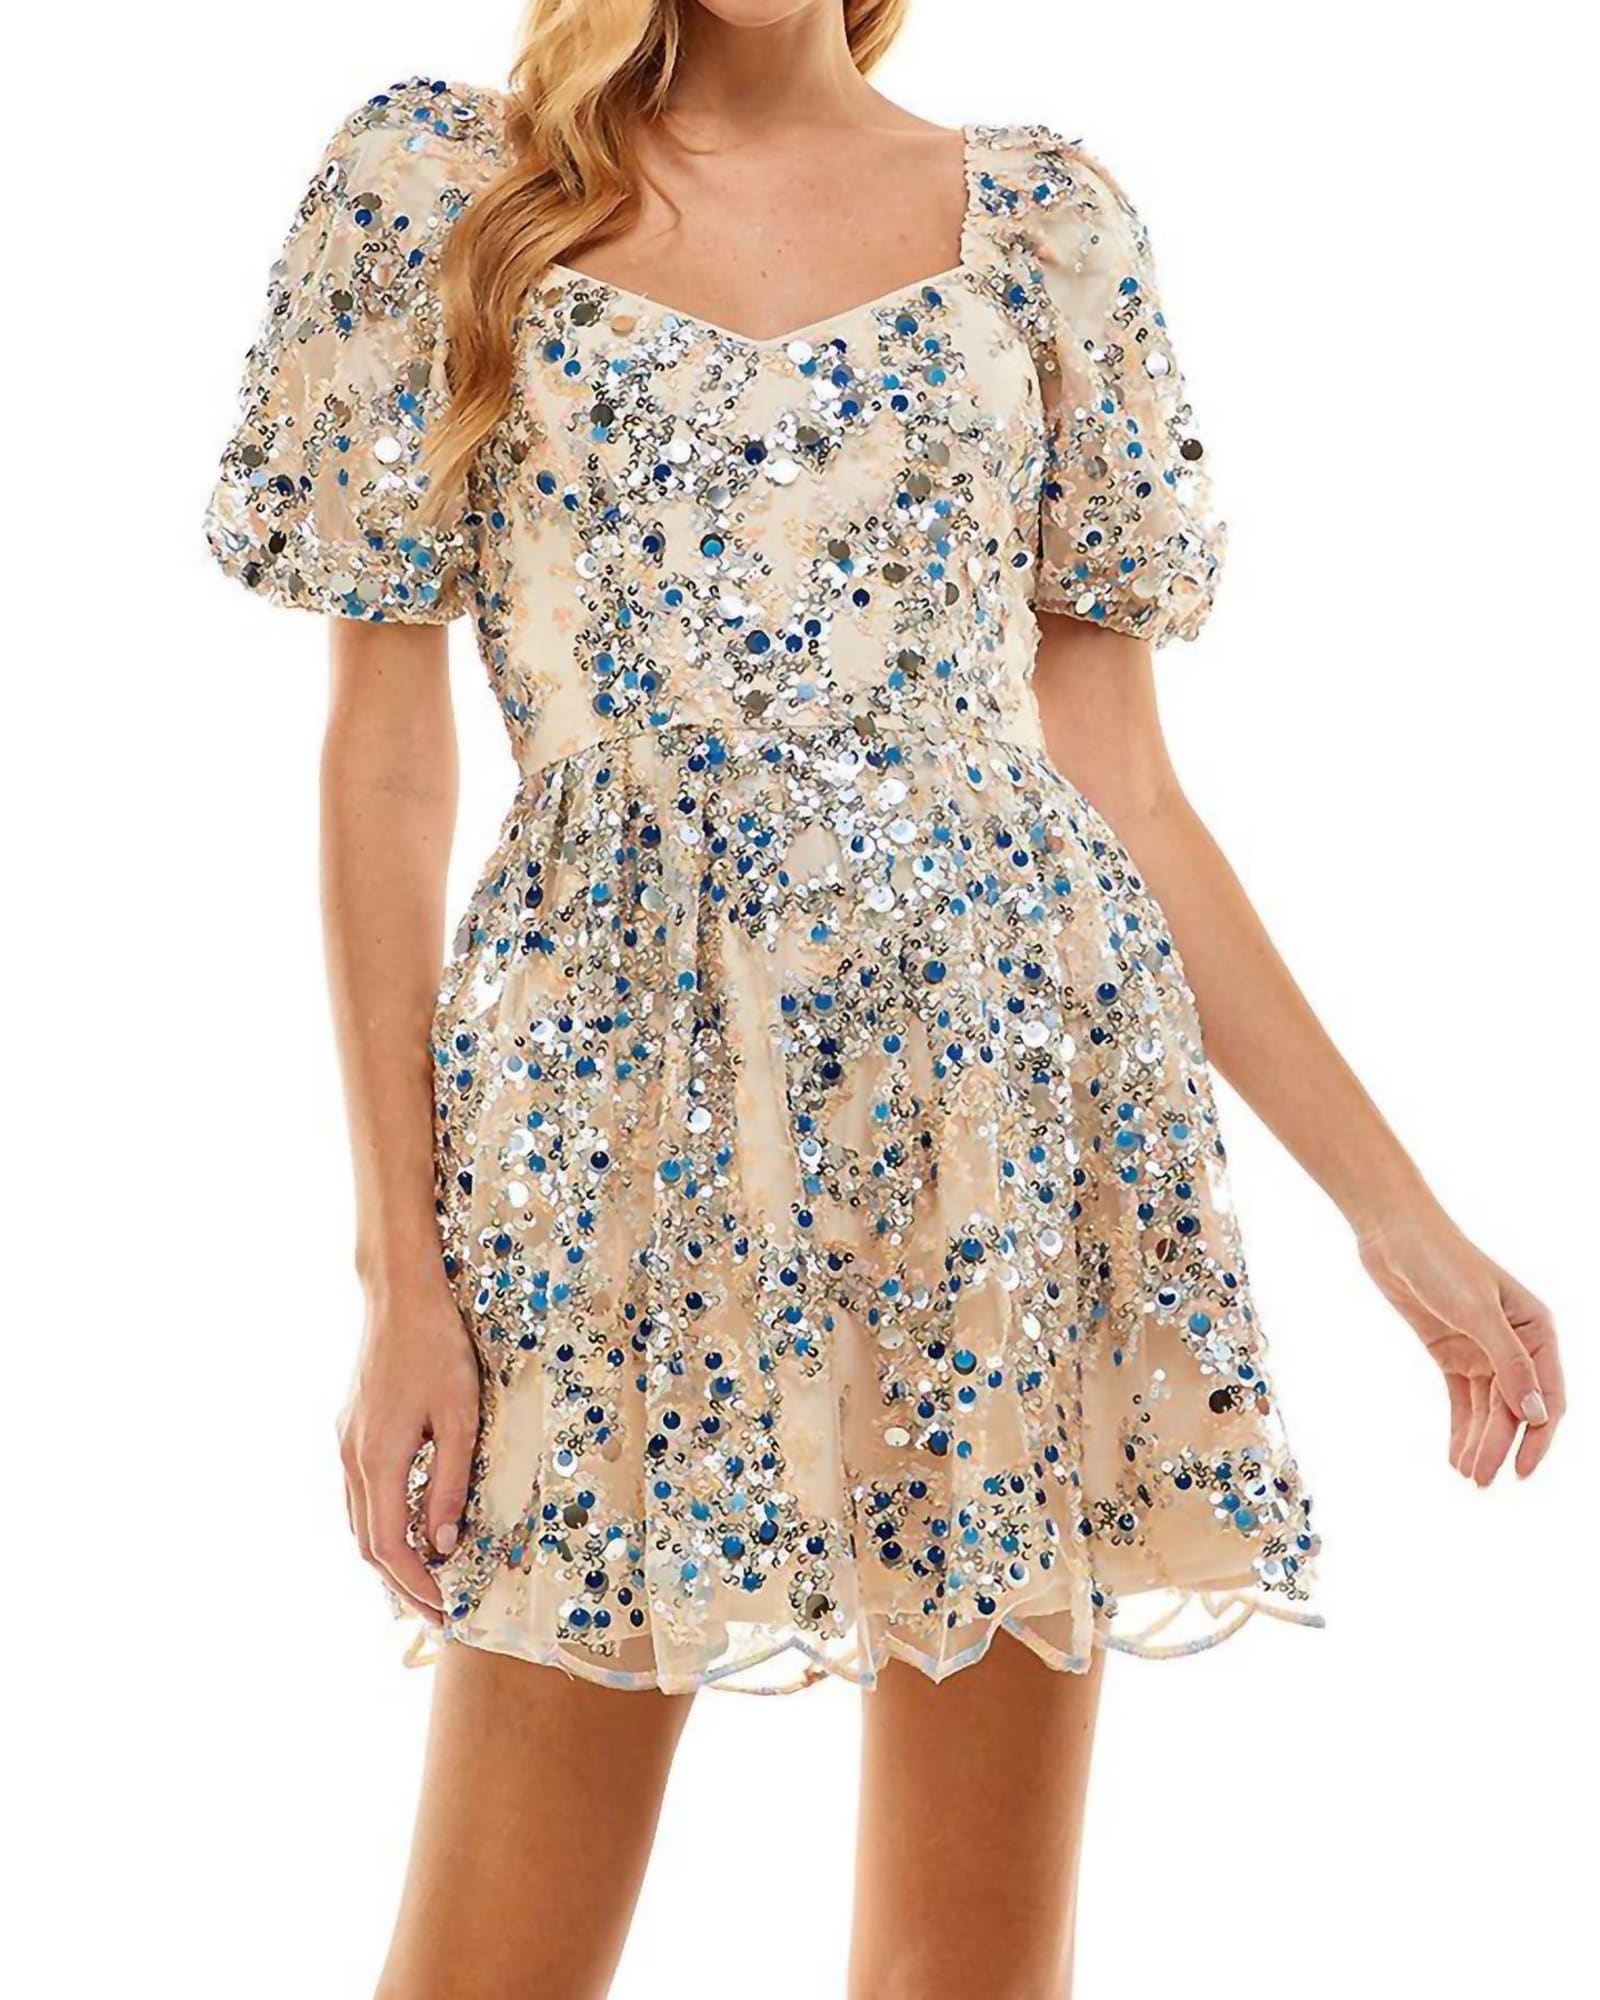 Sequin Sweetheart Dress in Silver, Blue, And Nude Sequins | Silver, Blue, And Nude Sequins